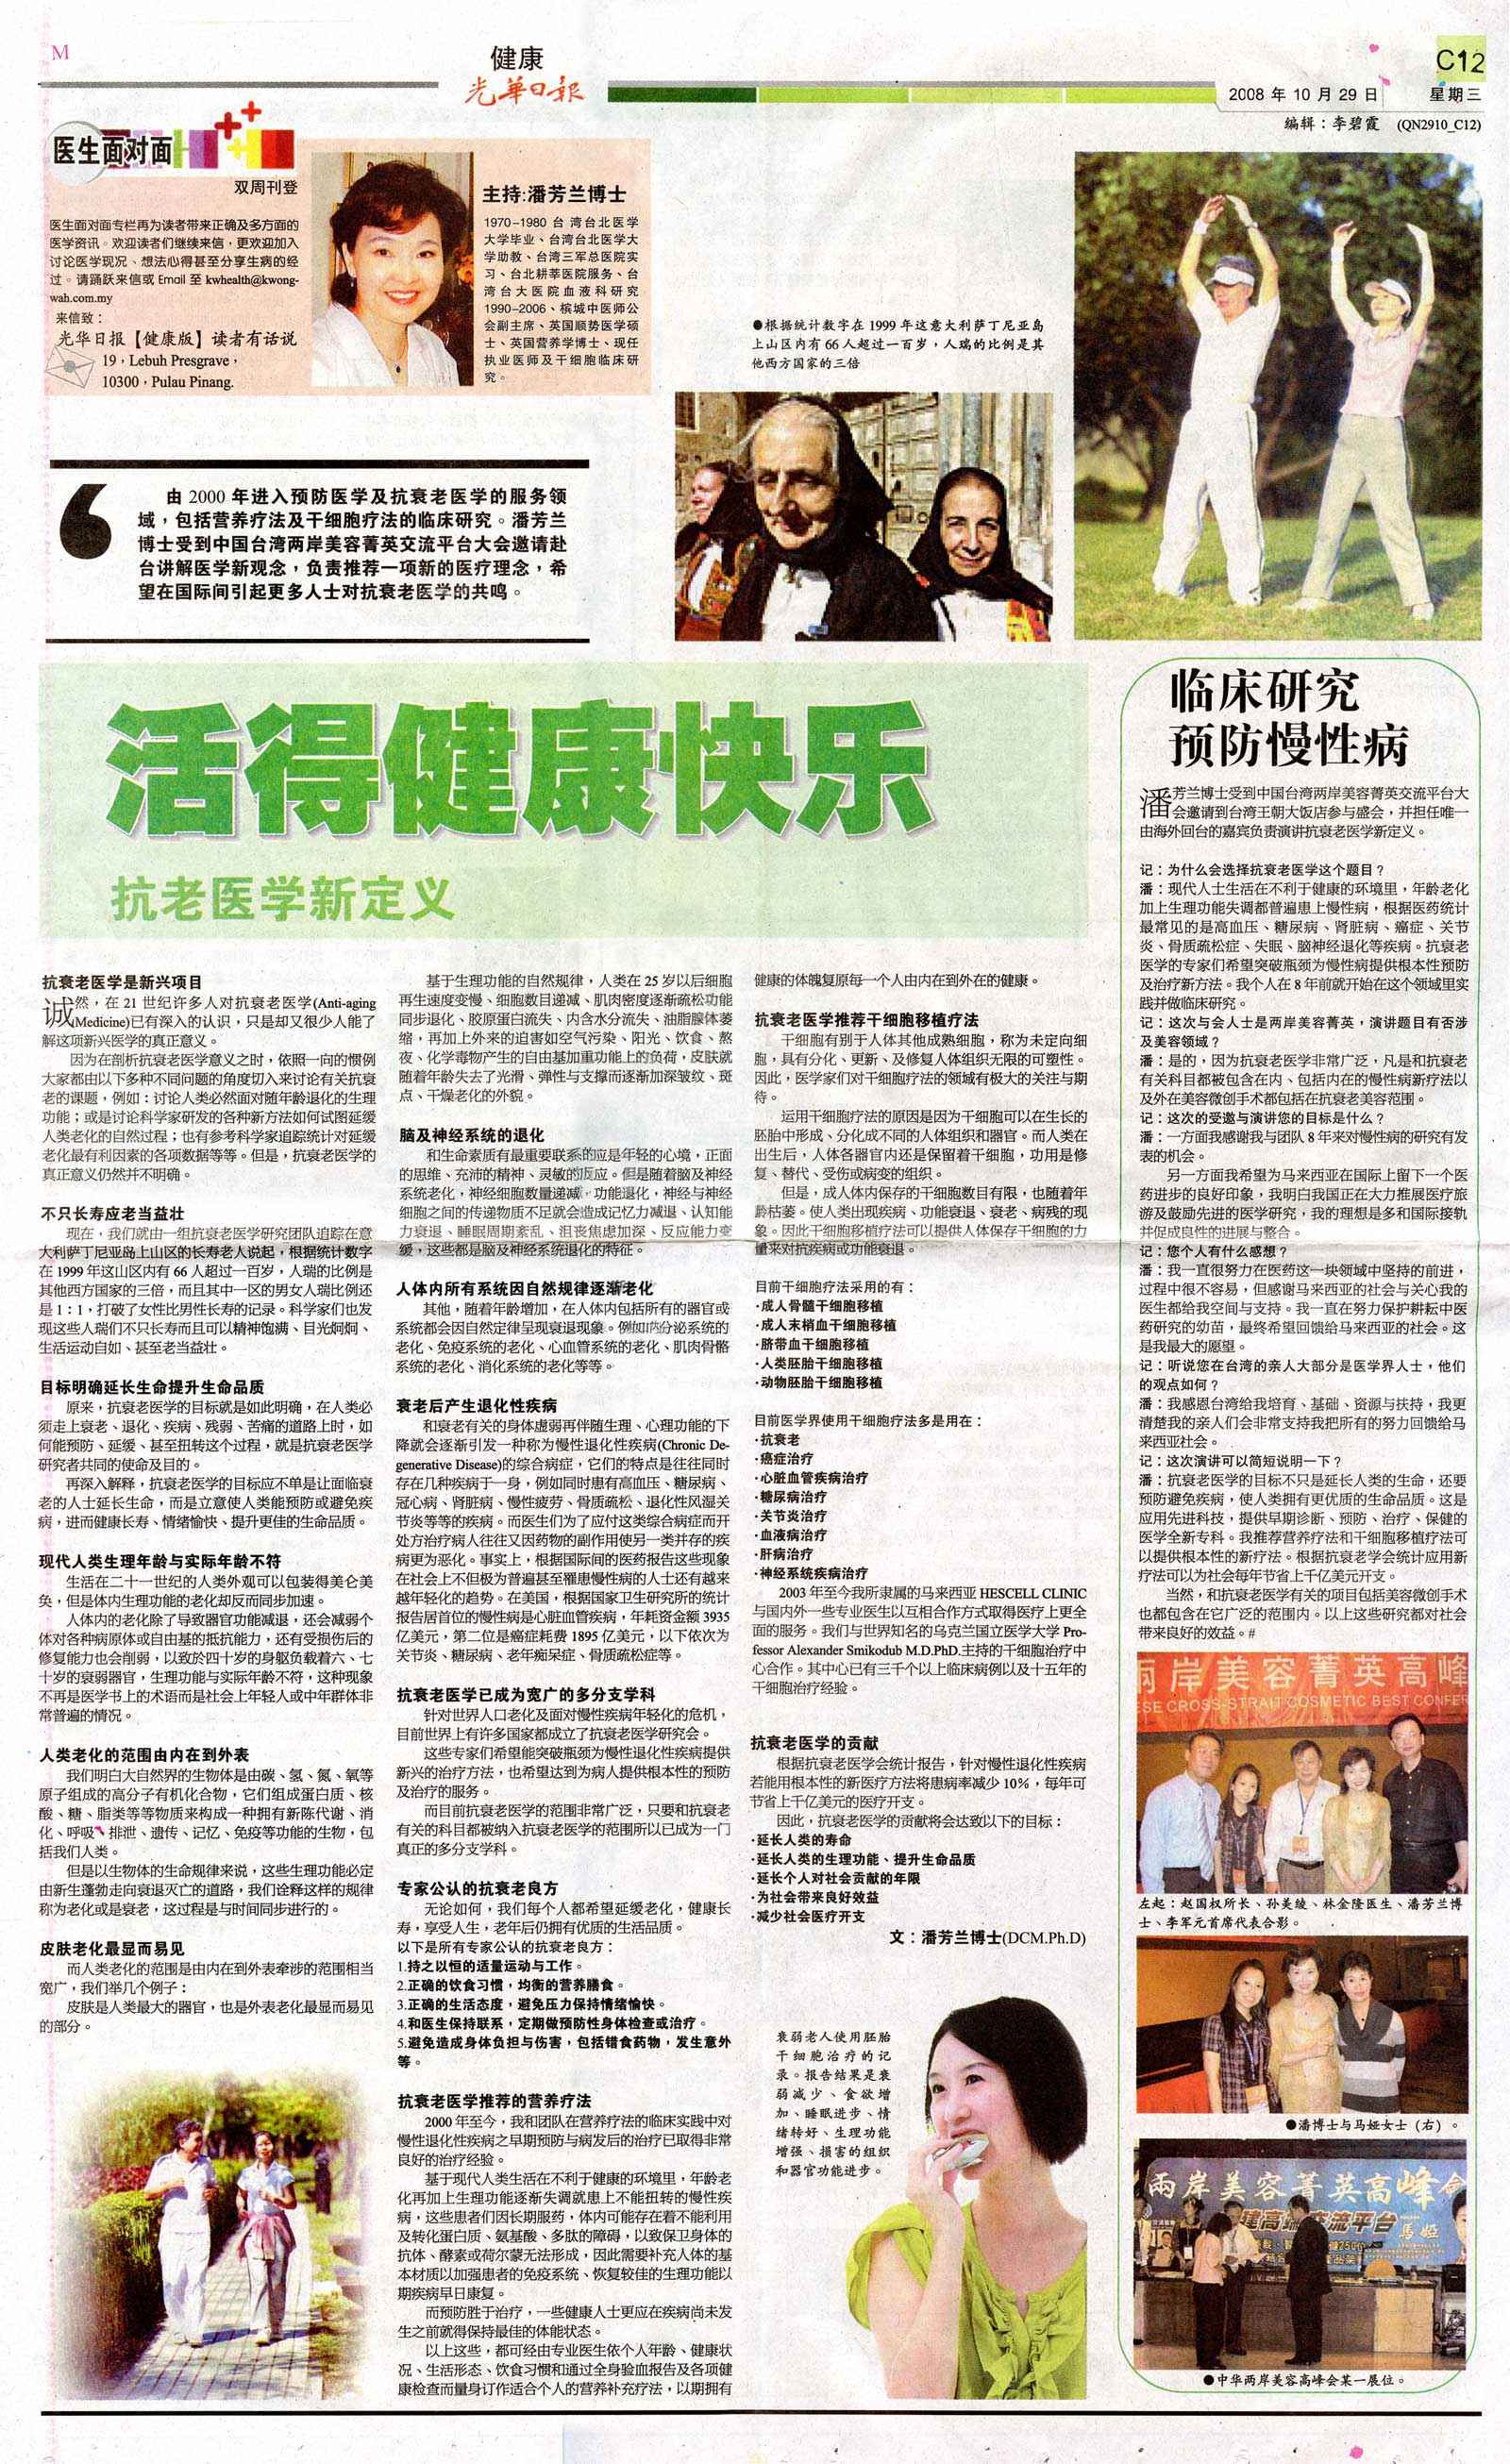 Kwong wah yit poh today news